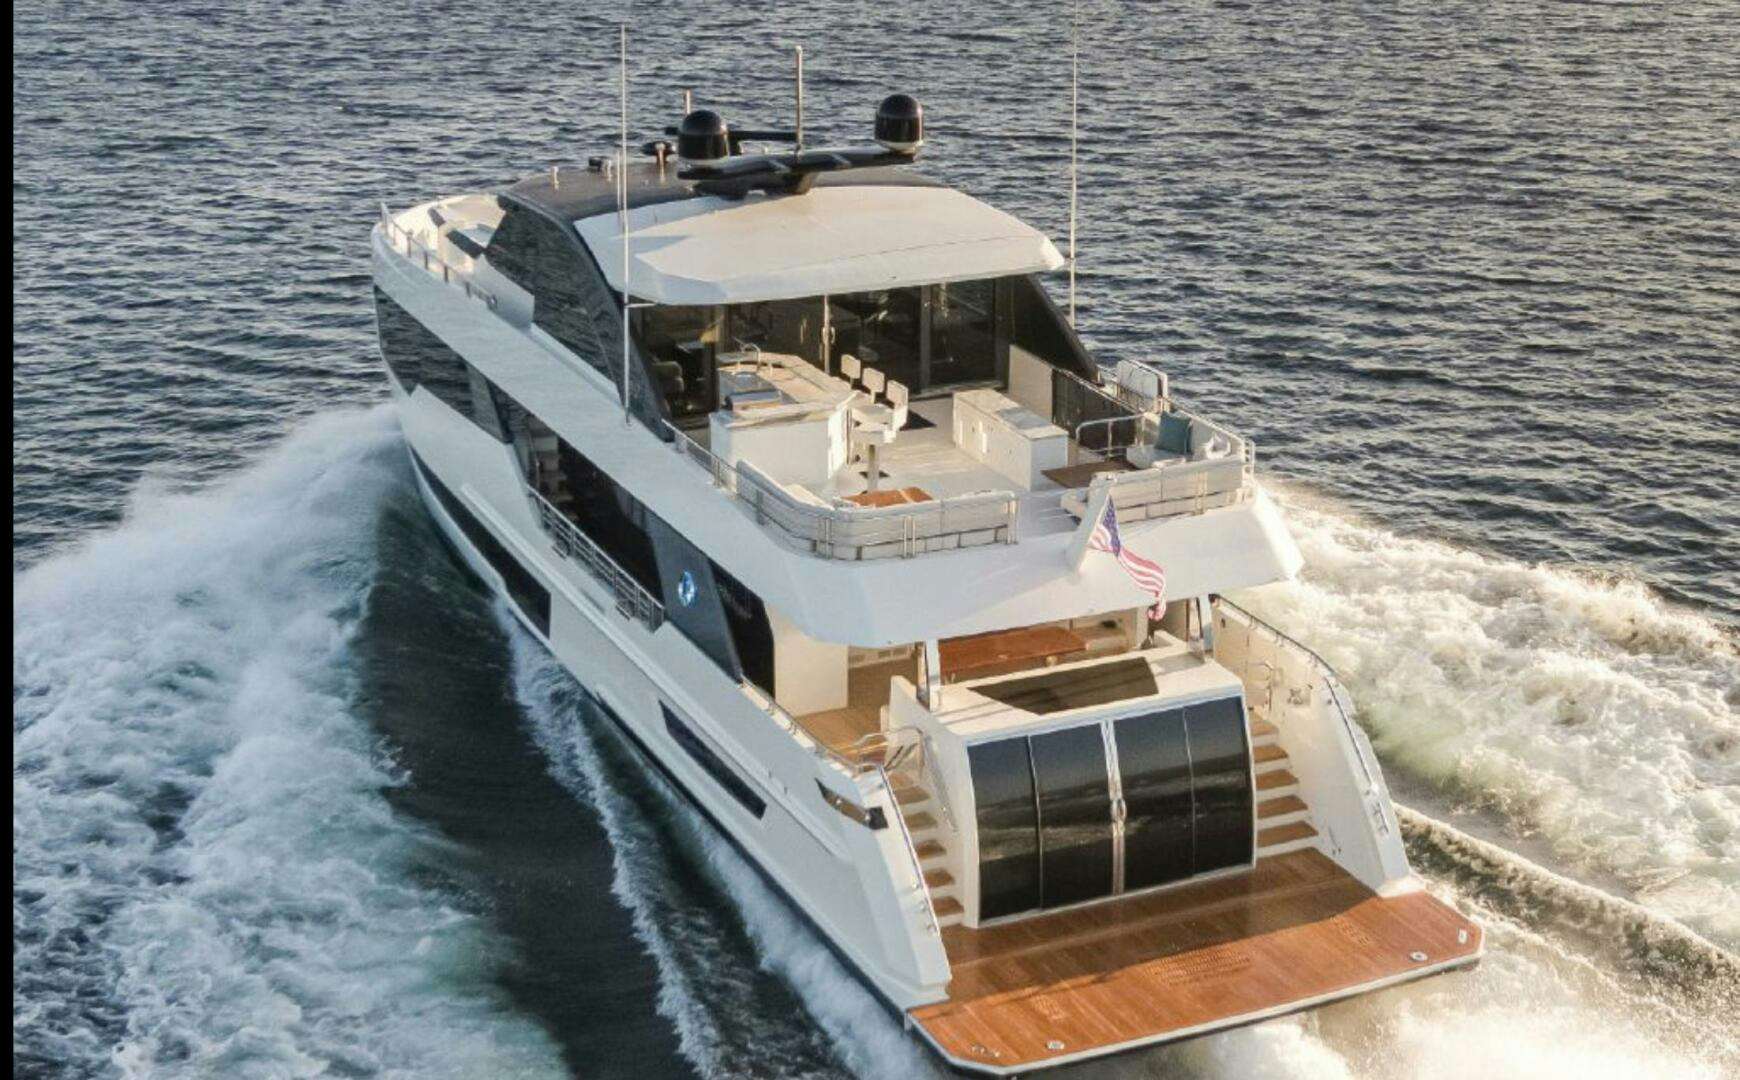 Tlc
Yacht for Sale